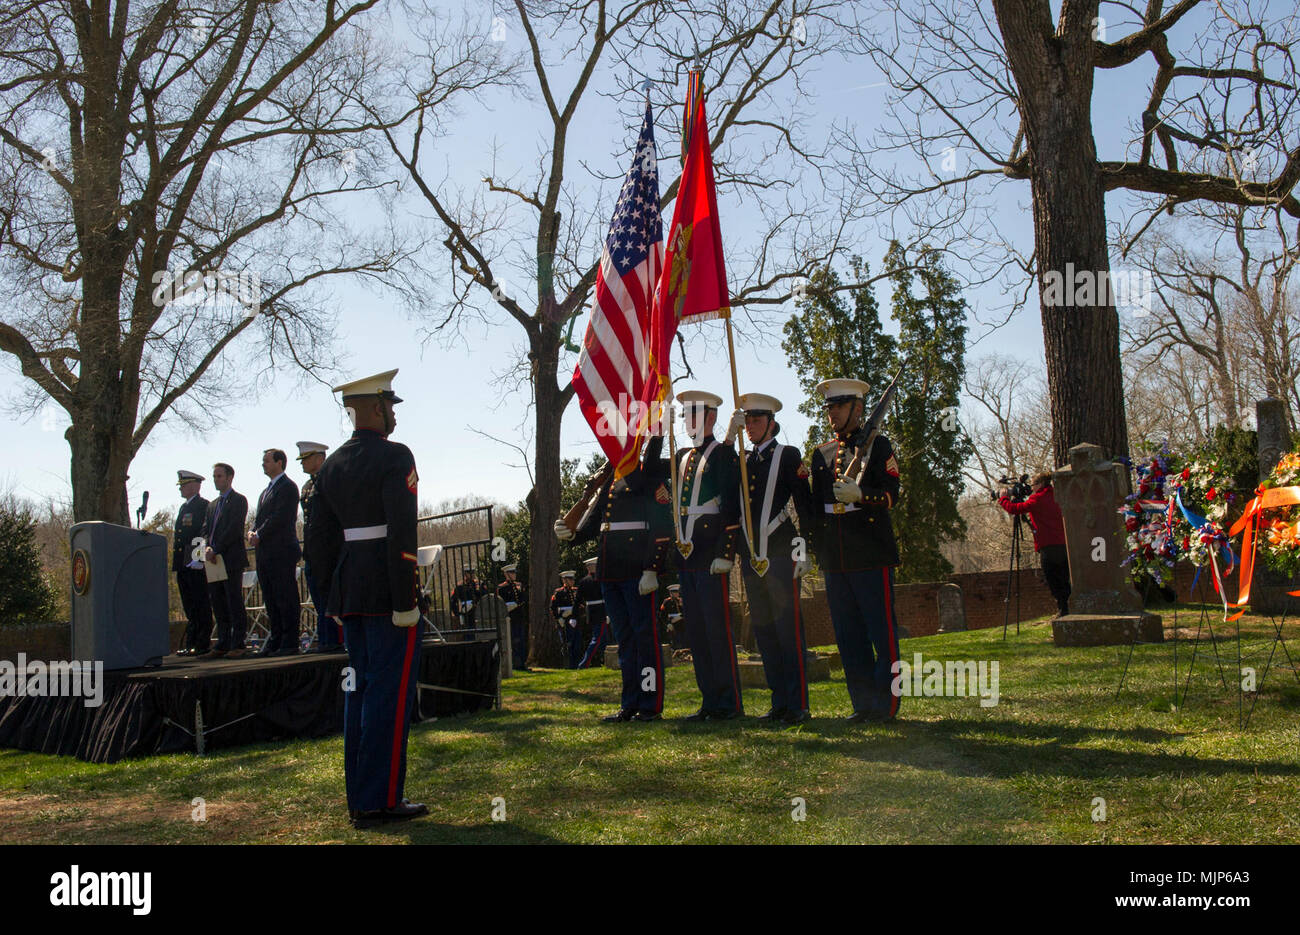 U.S. Marines with Marine Corps Base Quantico stand at the position of attention during the Presidential wreath laying ceremony honoring the 4th President of the United States, James Madison, also known as the Father of the Constitution, at his home at Montpelier, Orange, Va., March 16, 2018. This event was held in commemoration of the 267th anniversary of the birth of Madison, born in 1751, and has also been decreed as James Madison Appreciation Day for the Commonwealth of Virginia. Armed Forces and civilians displaying courage bravery dedication commitment and sacrifice Stock Photo